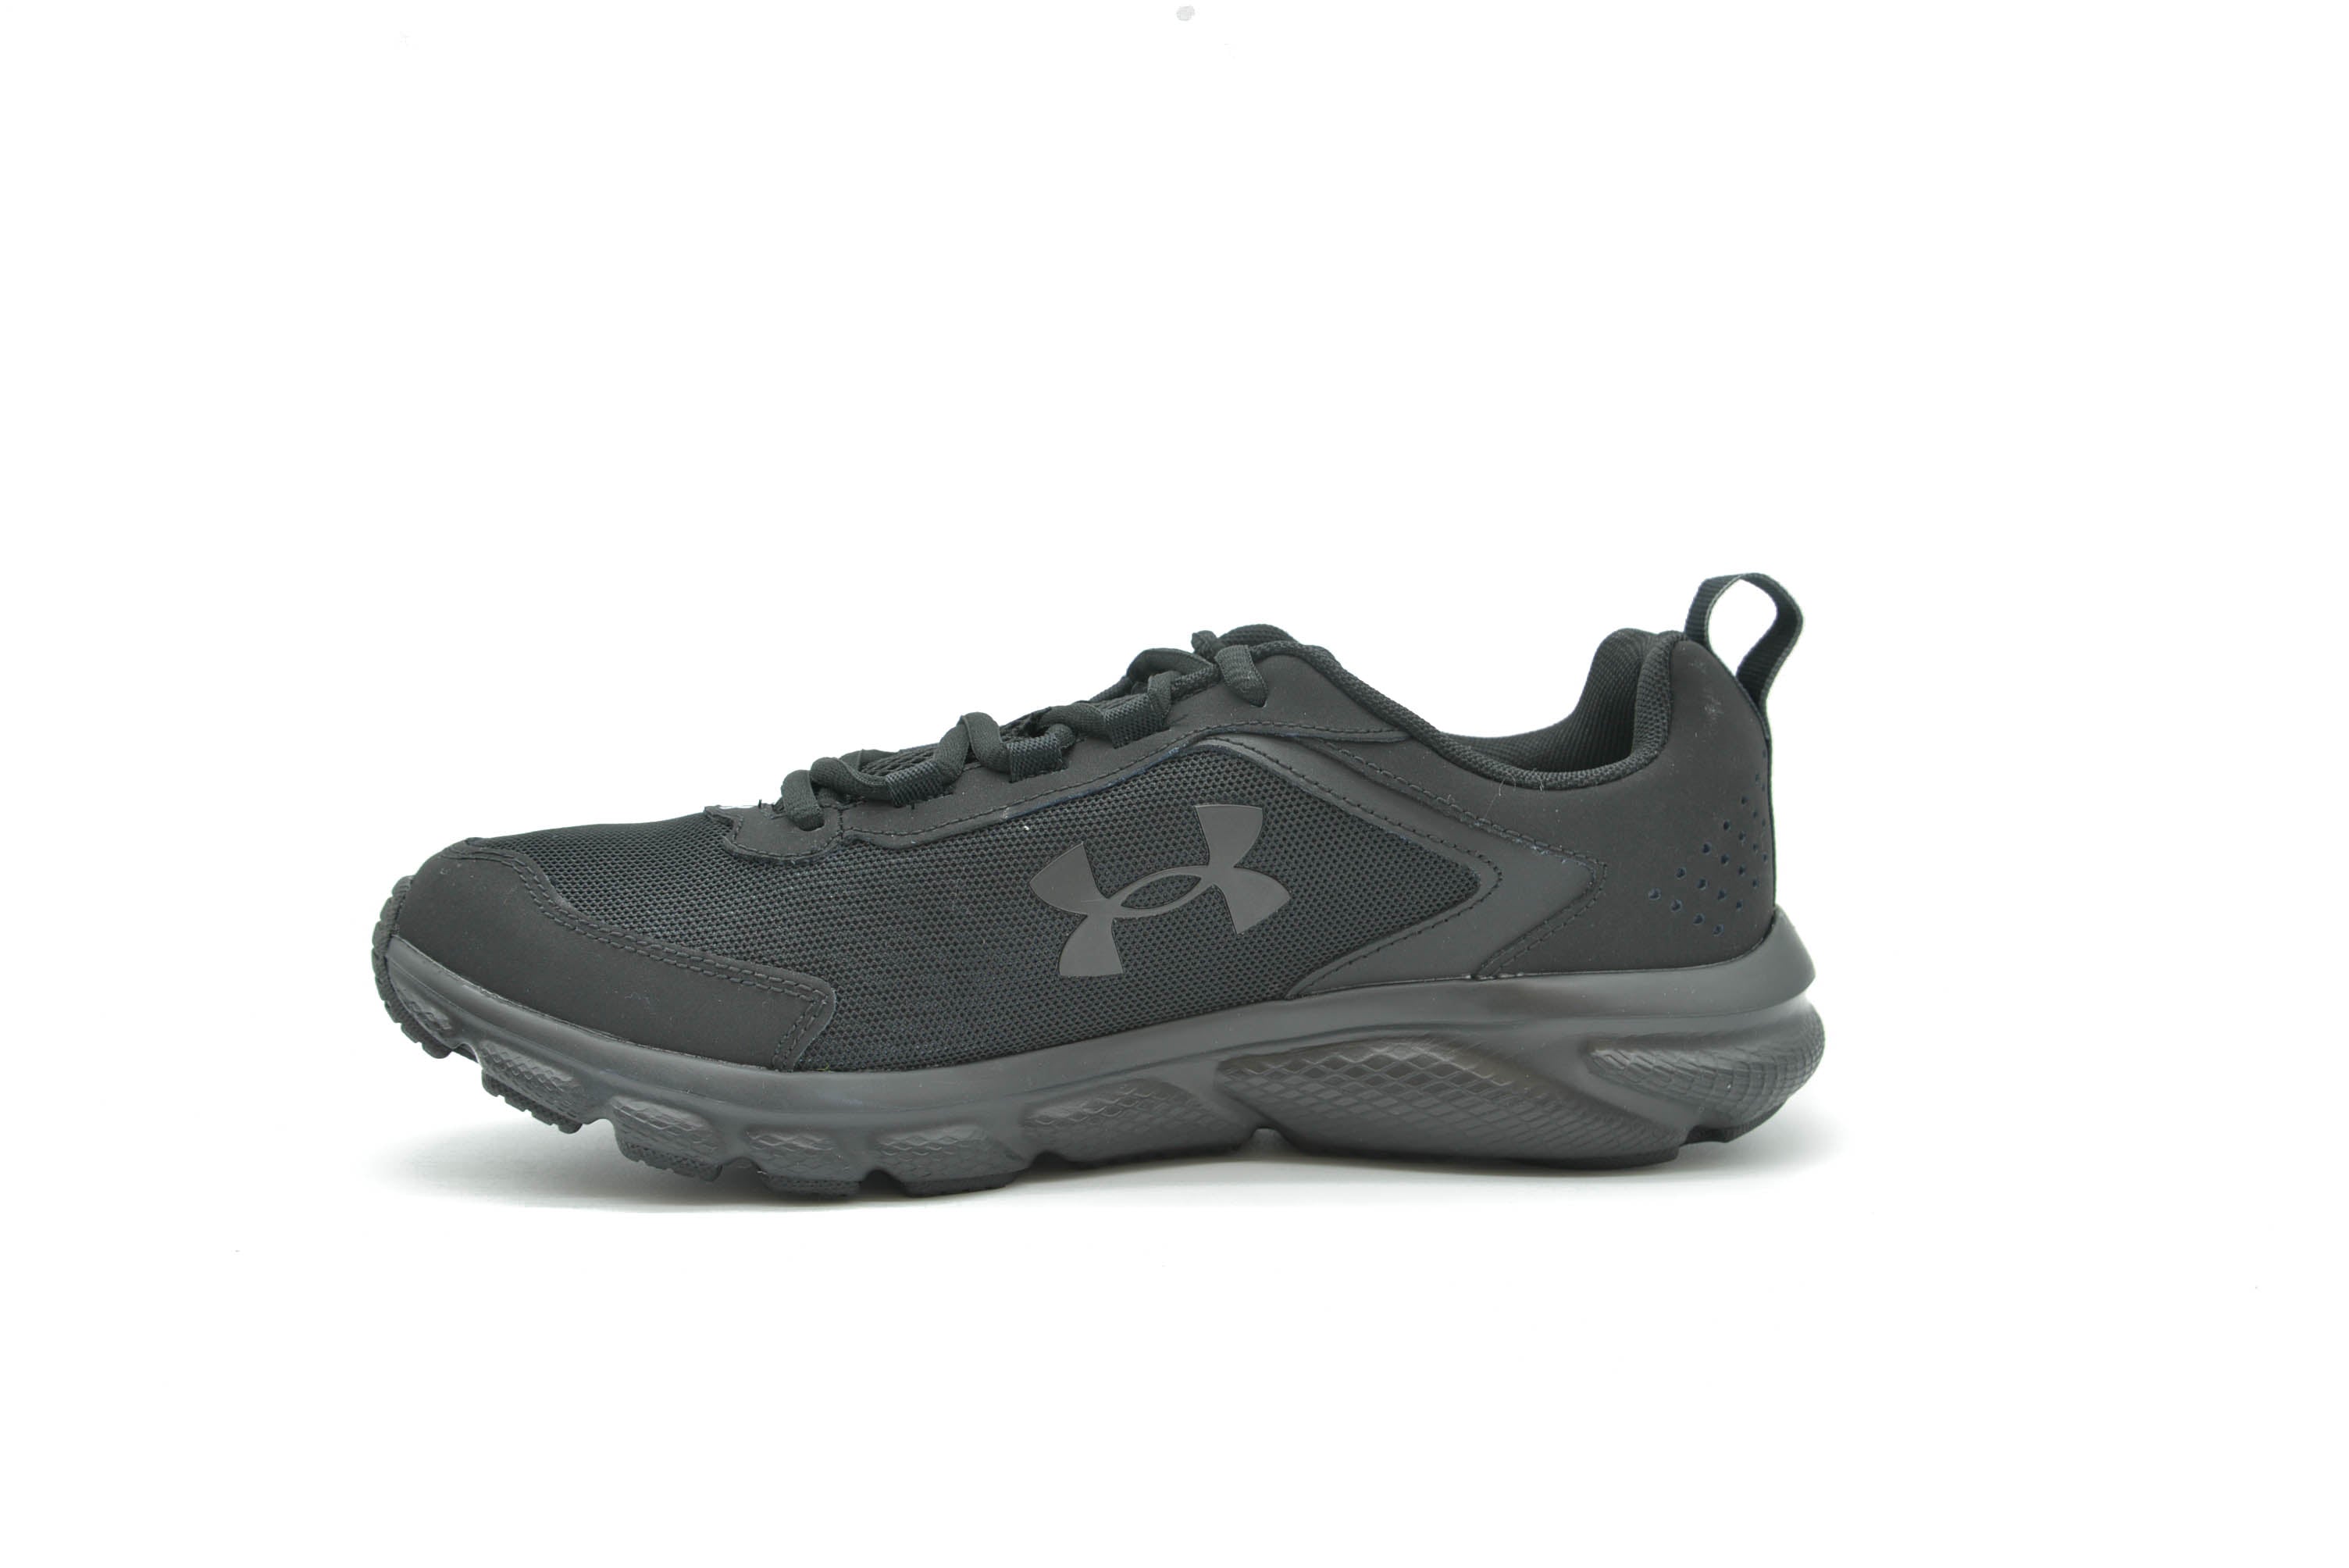 Under Armour Charged Assert 9